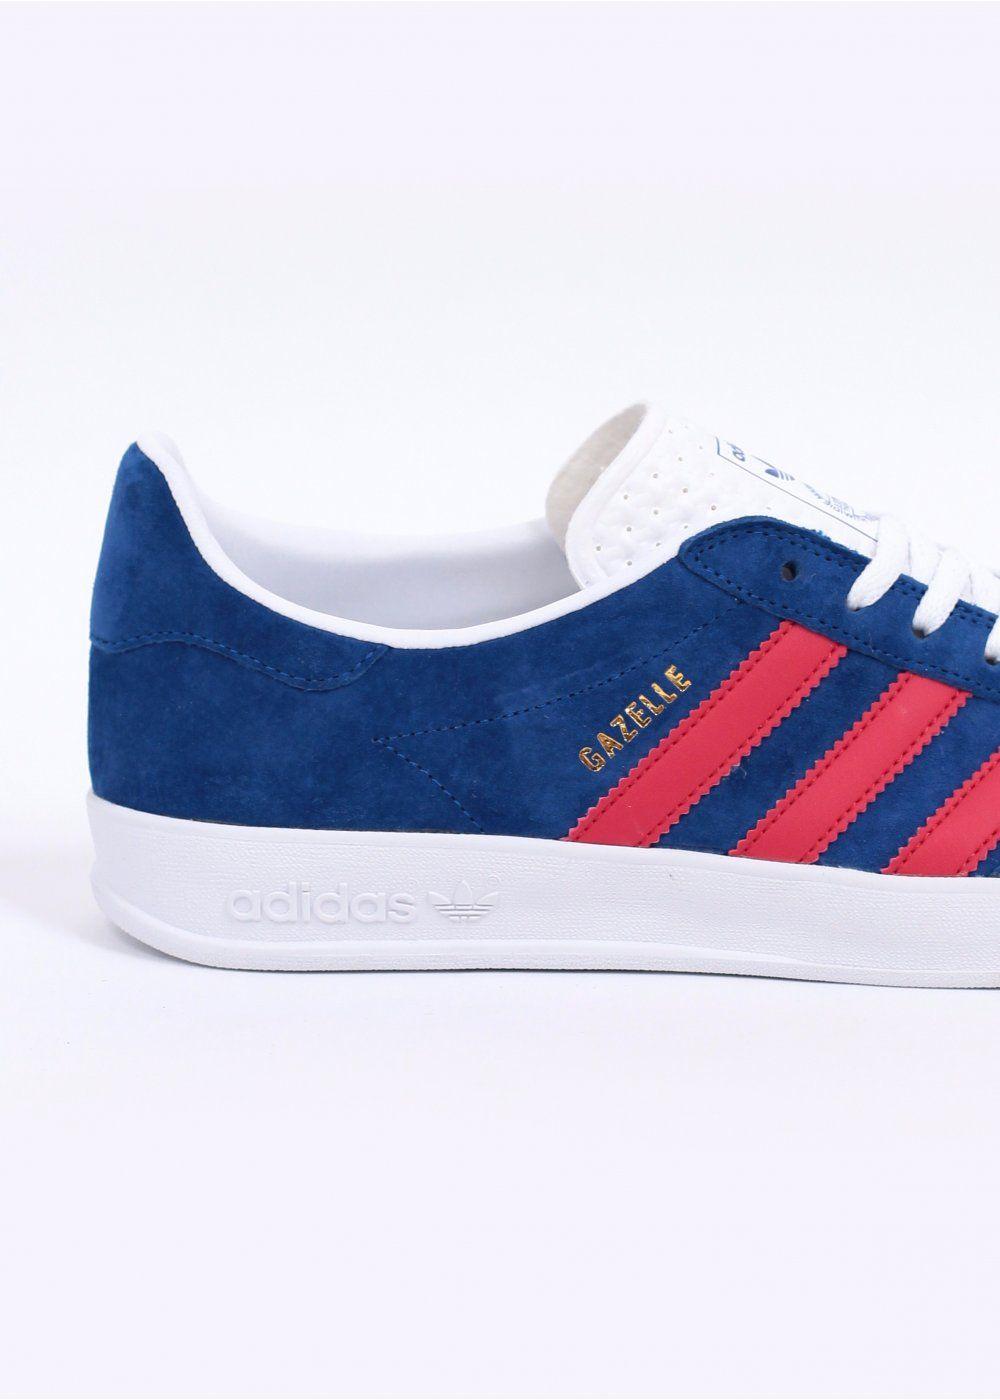 Blue and Red Adidas Logo - adidas Originals Gazelle Indoor Trainers - Royal Blue / Red